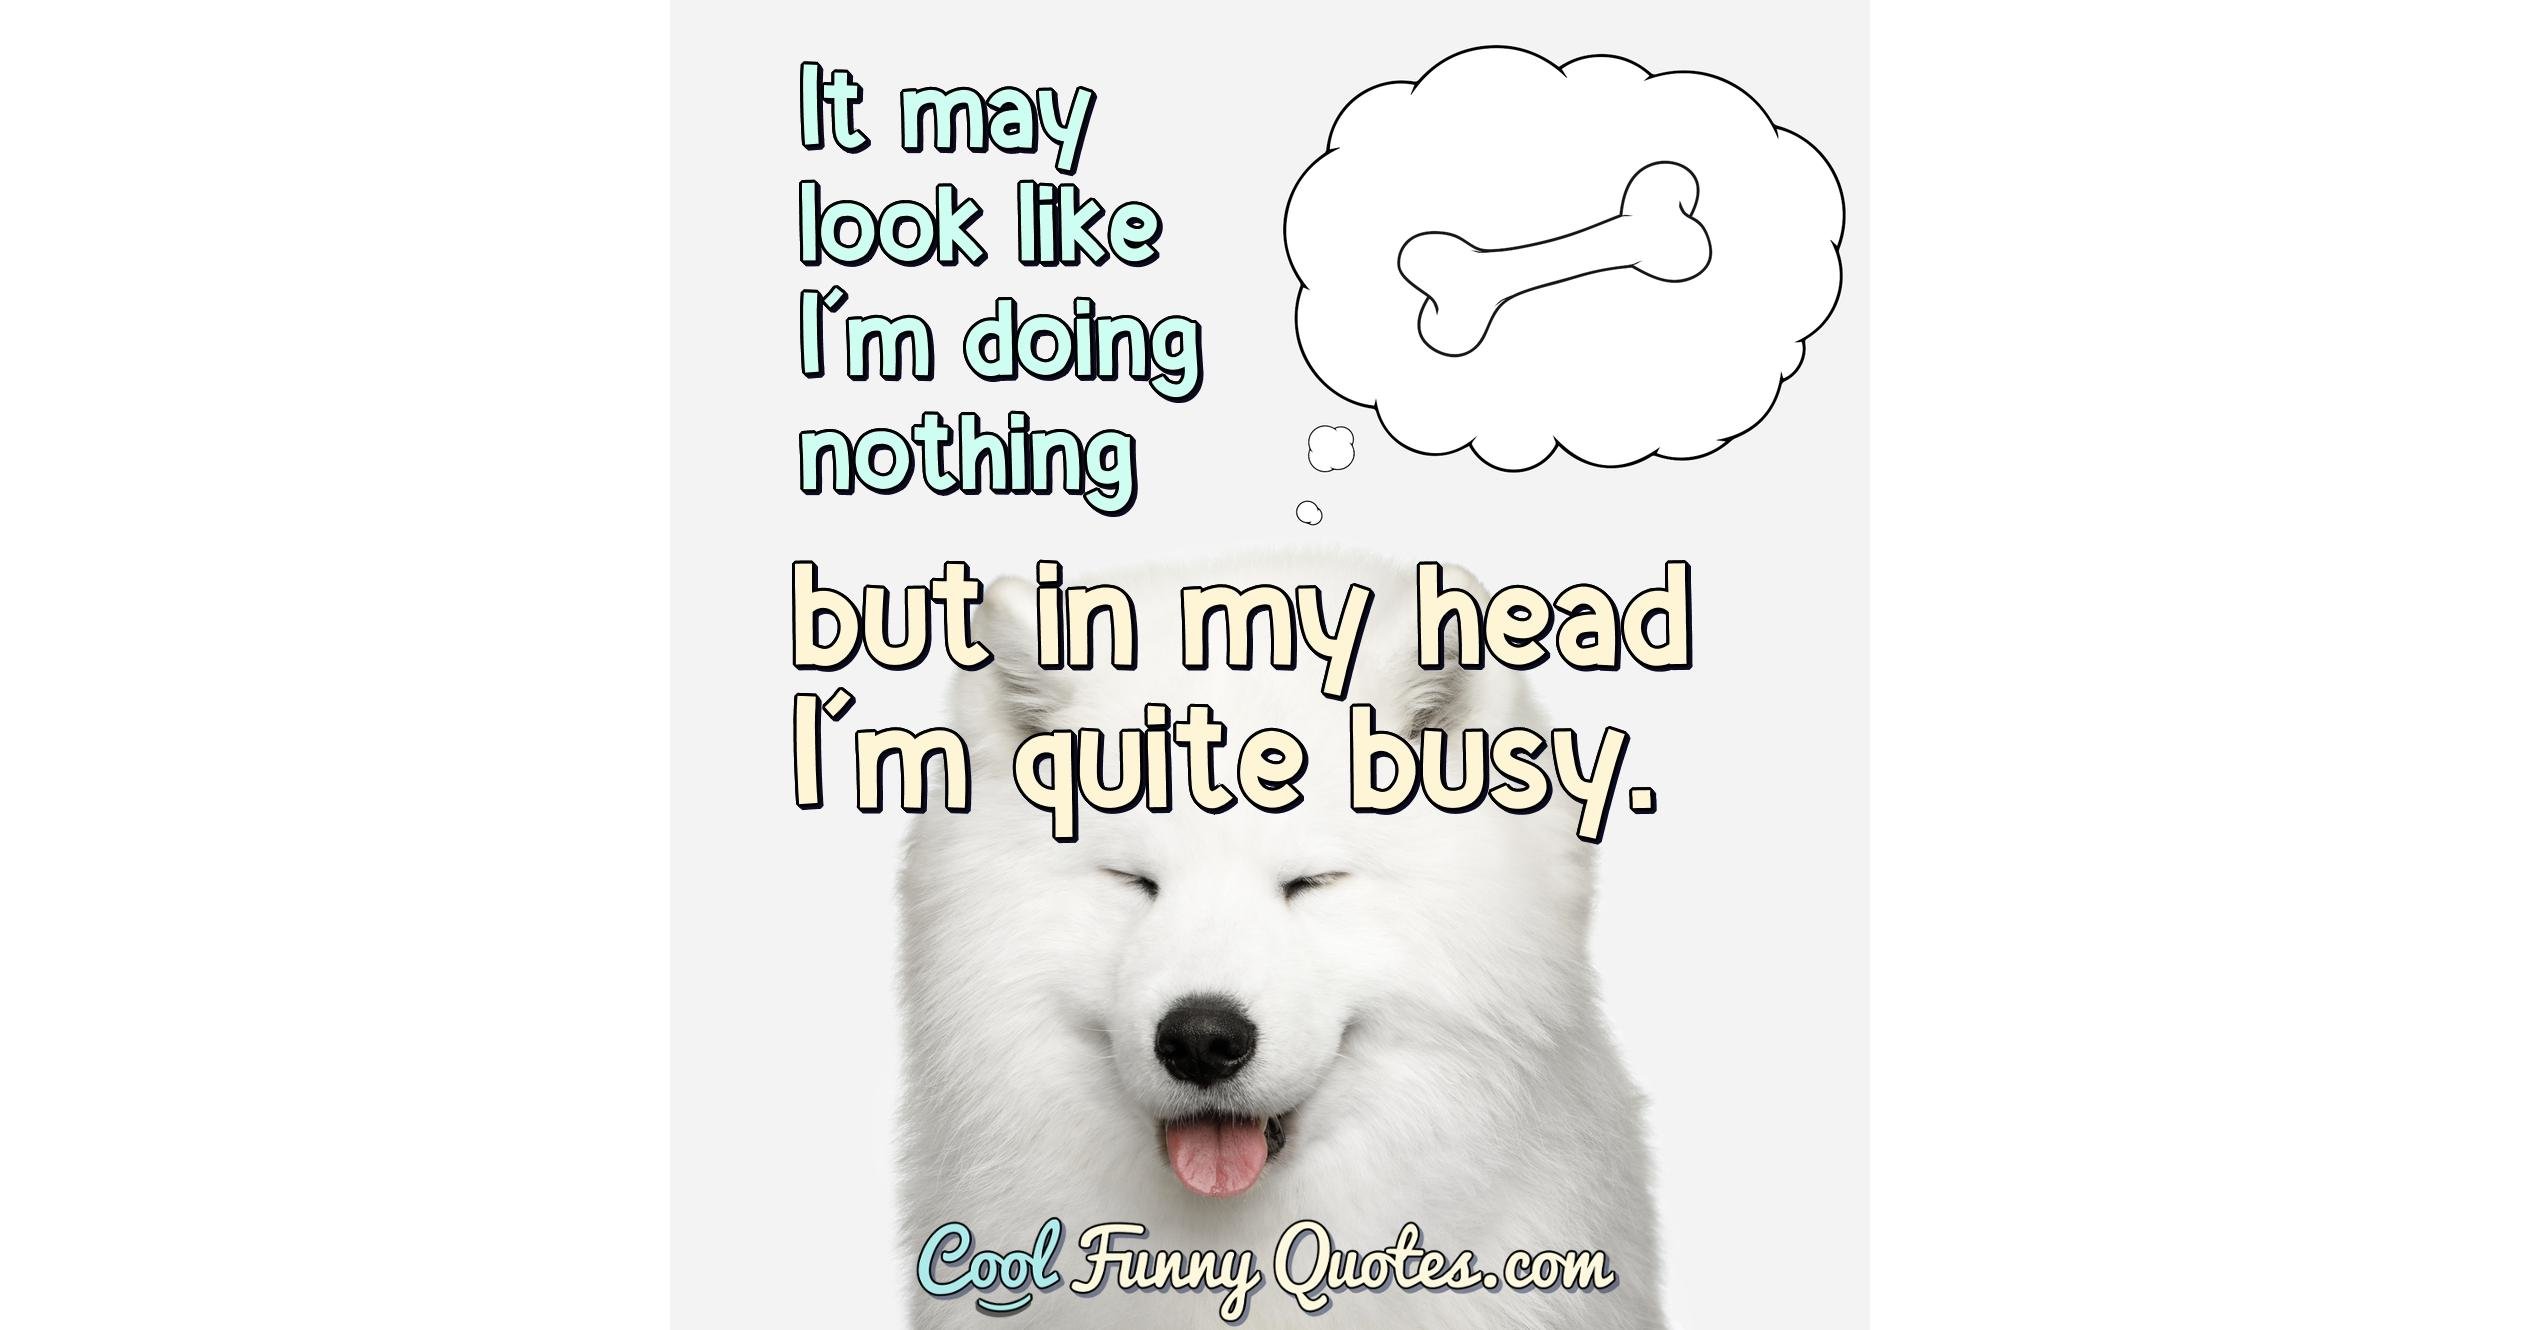 It may look like I'm doing nothing, but in my head I'm quite busy.